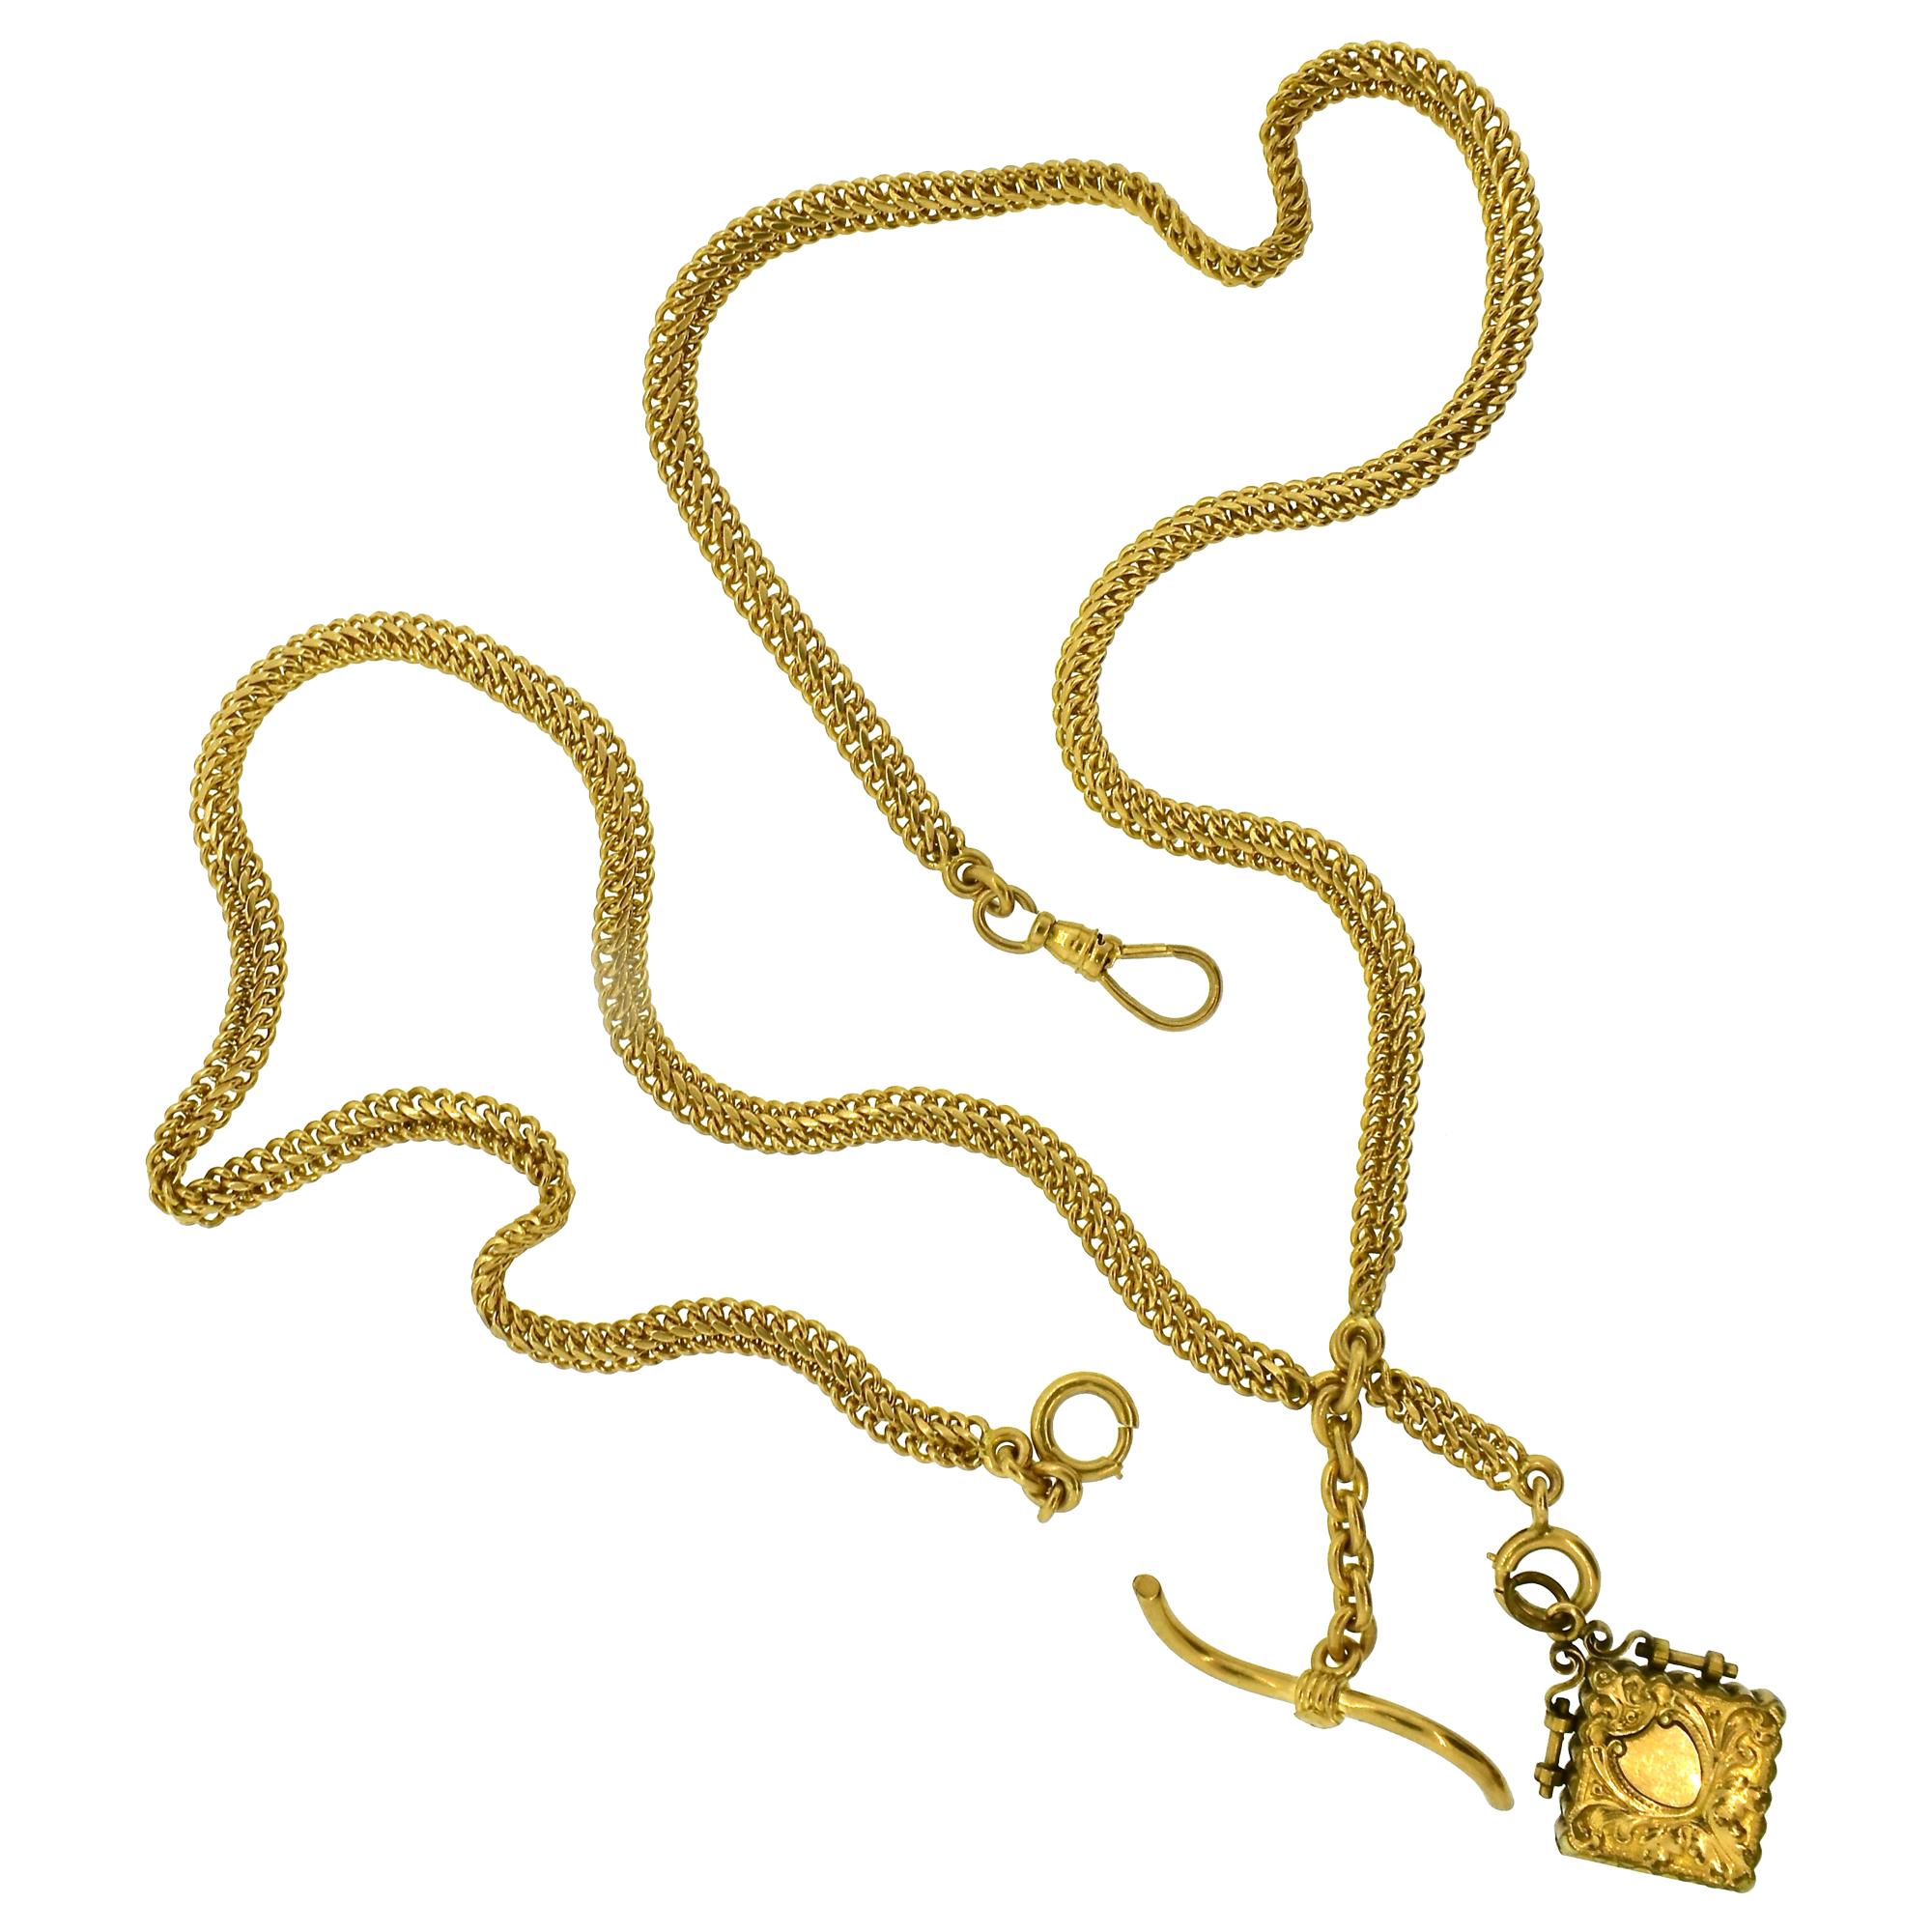 Antique Gold Chain with Fobs, circa 1900